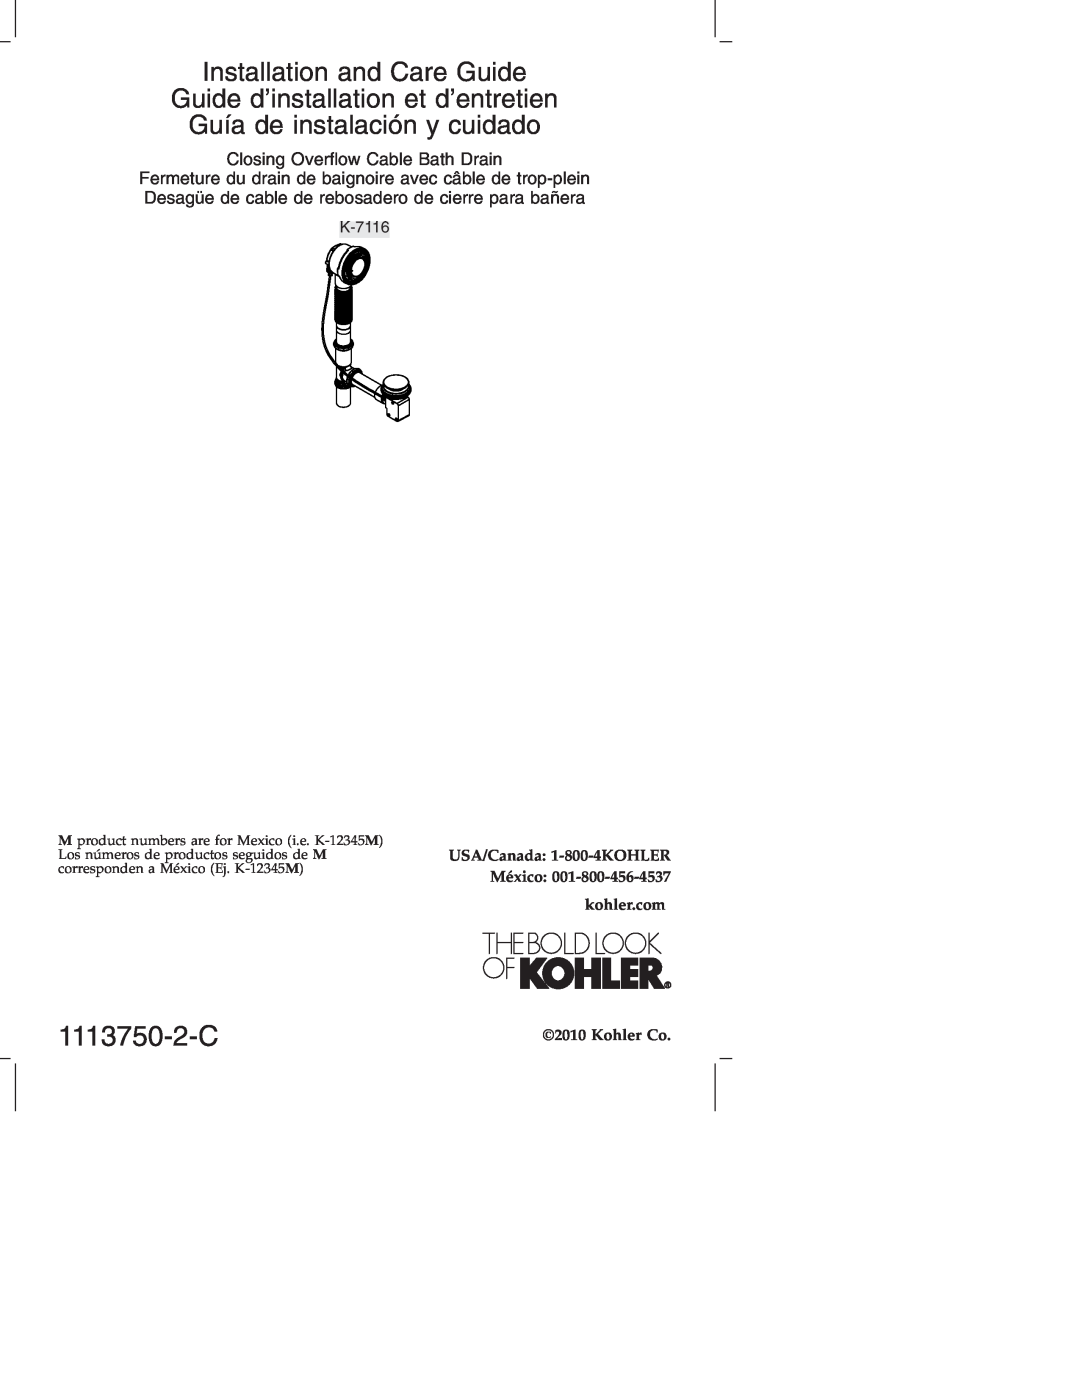 Kohler K-7116 manual 1113750-2-C, Installation and Care Guide, Closing Overﬂow Cable Bath Drain, Kohler Co 